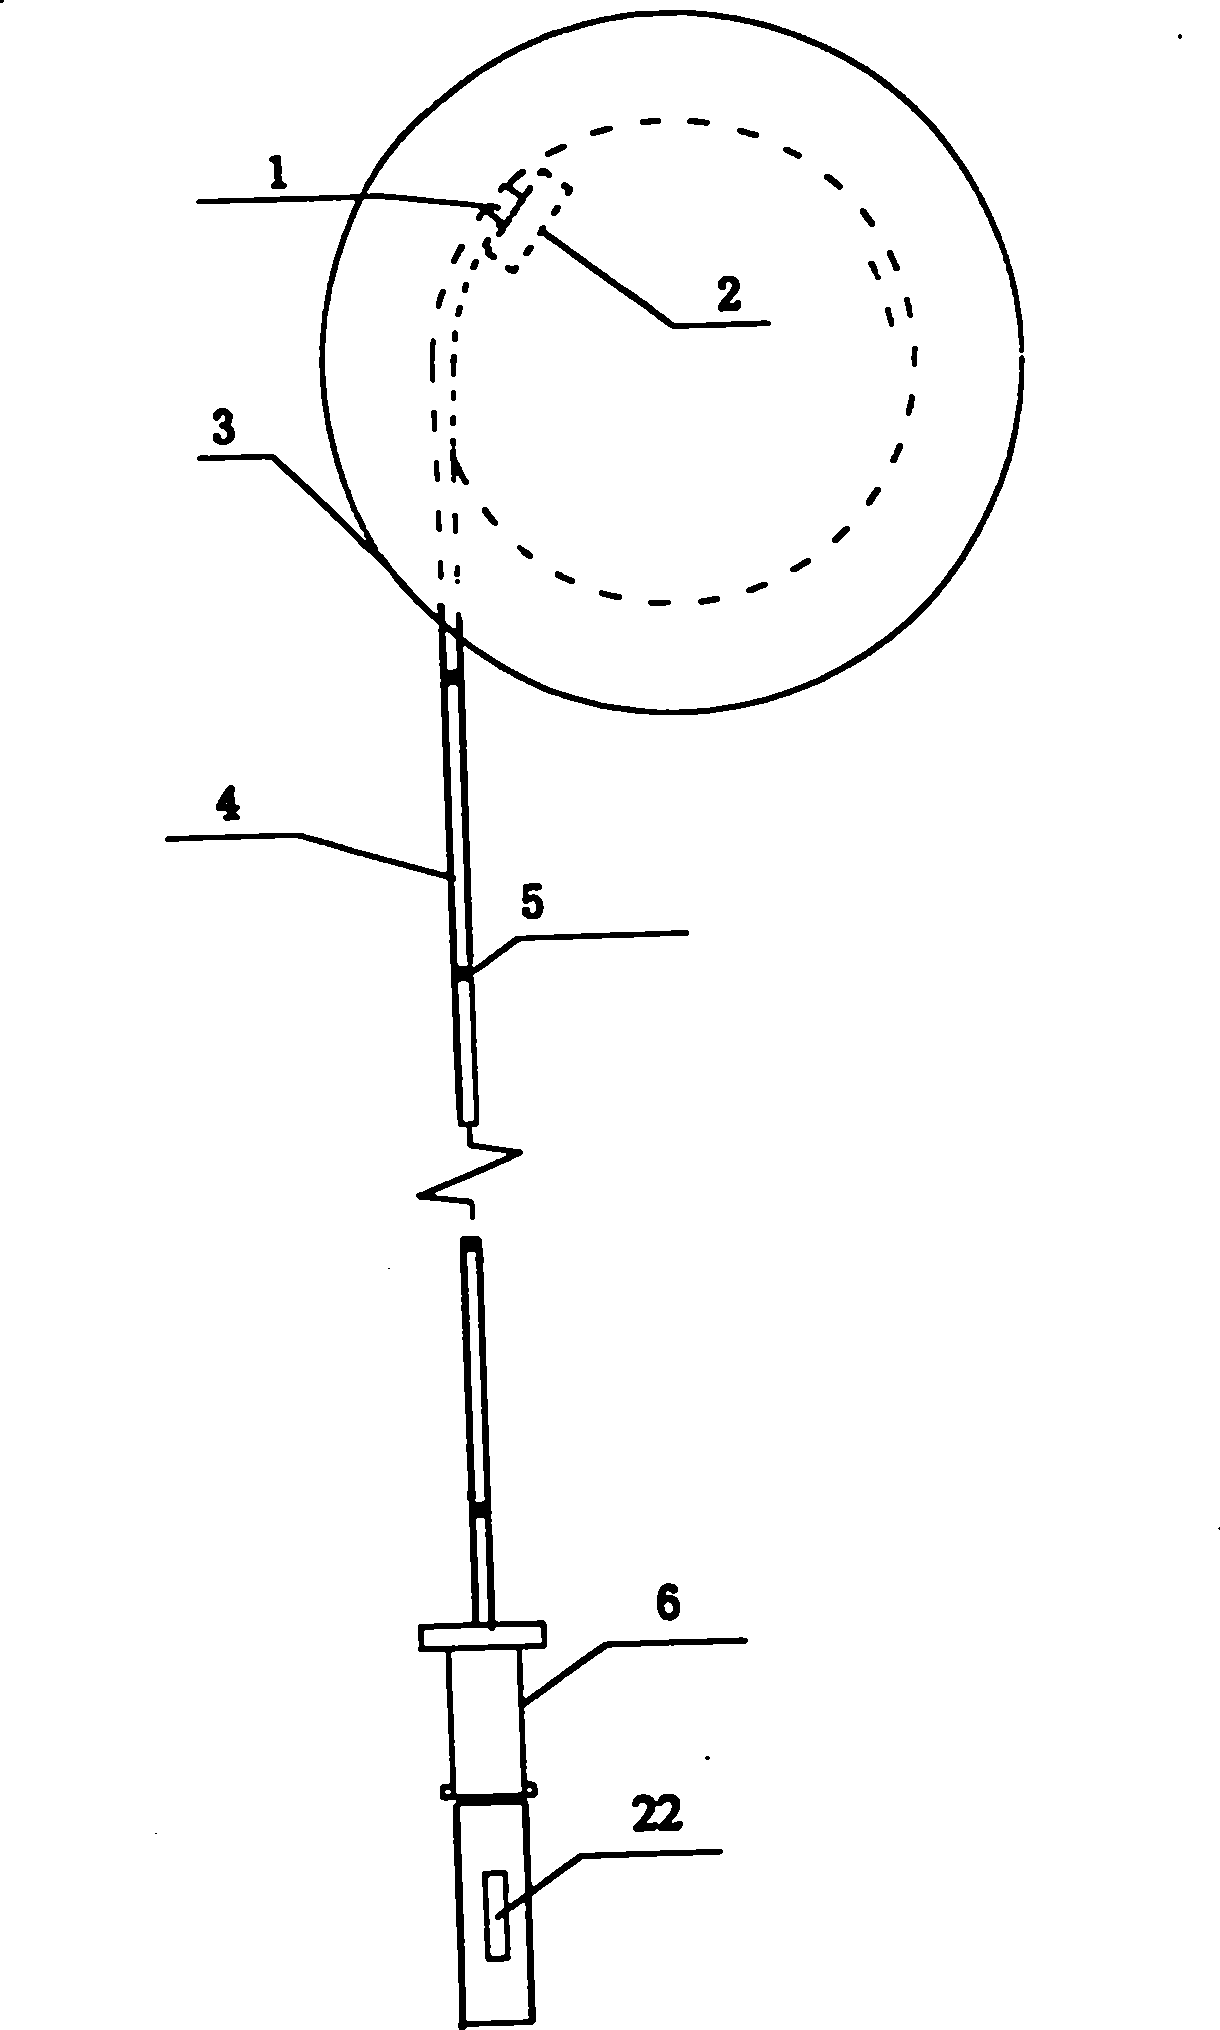 Load-bearing conductive signalling non-extension cable of slided intelligent clinometer